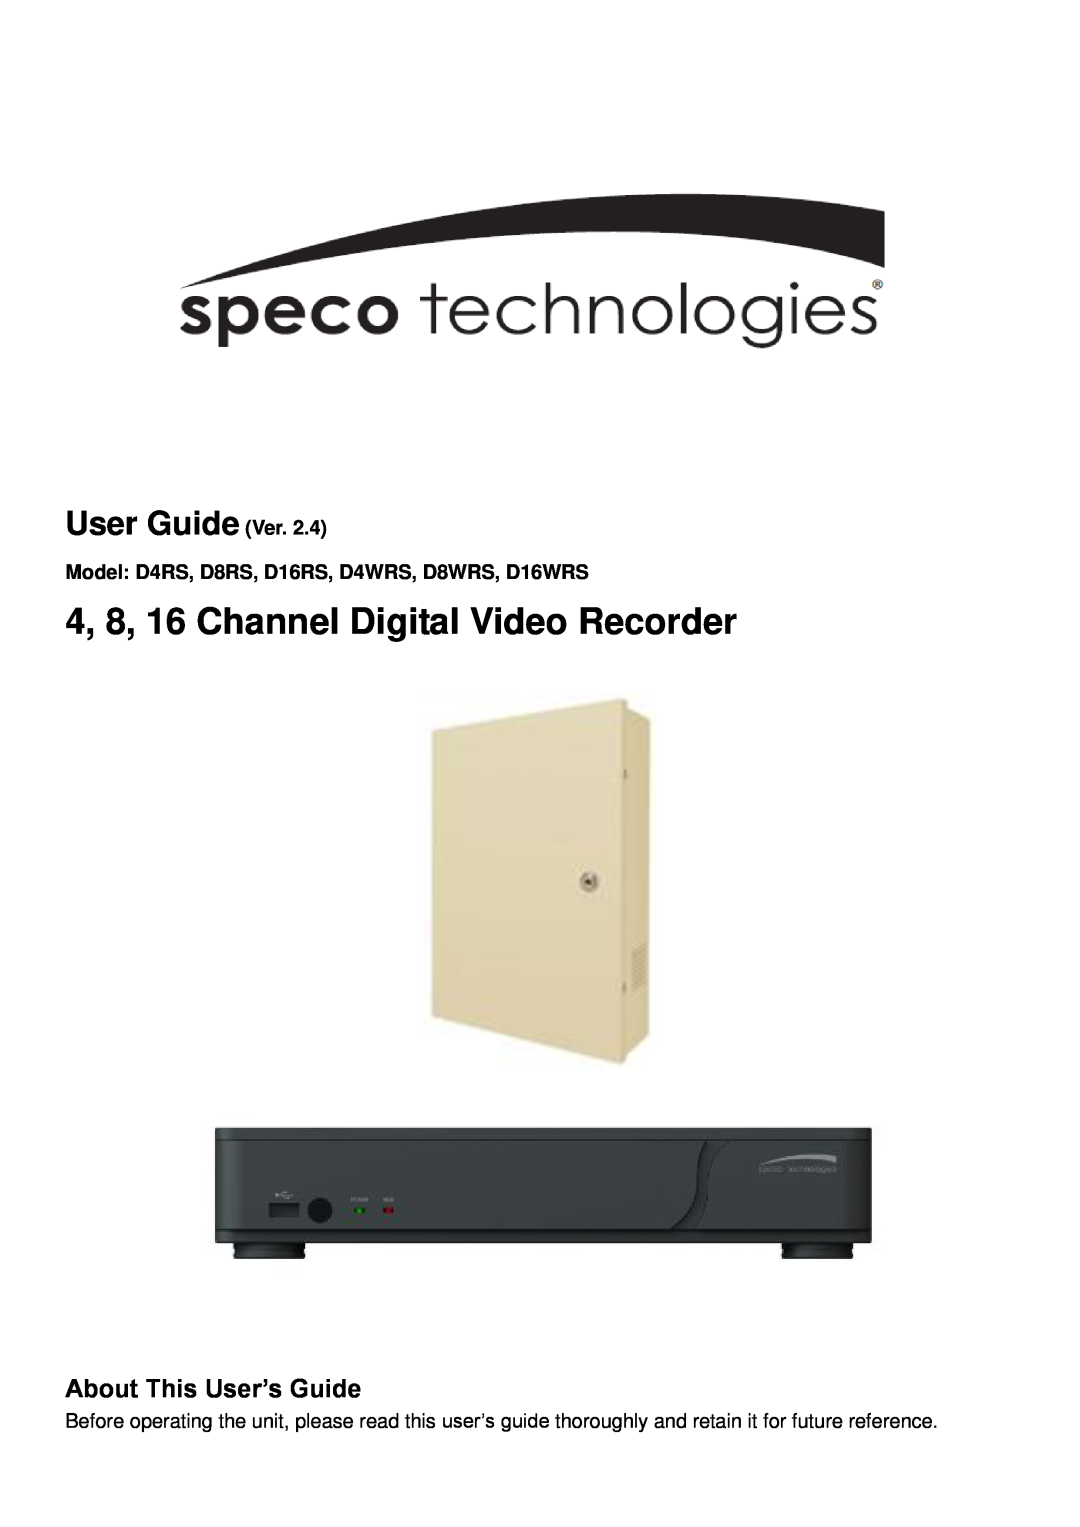 Speco Technologies D4RS, D16RS manual User Guide Ver, 4, 8, 16 Channel Digital Video Recorder, About This User’s Guide 